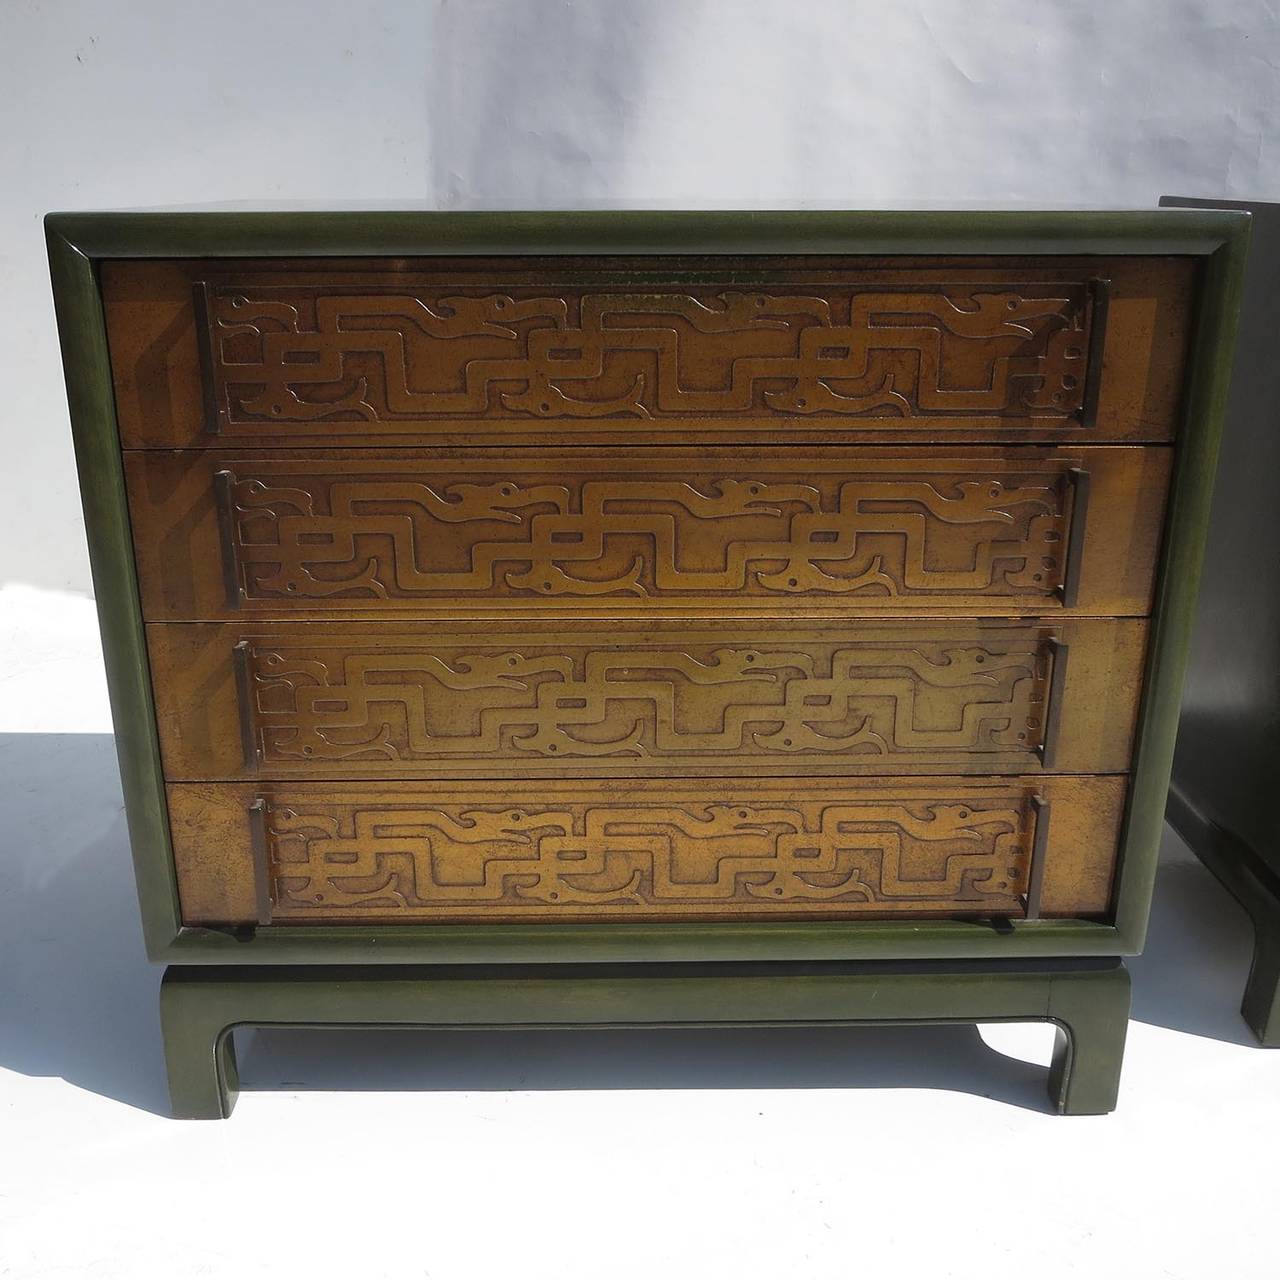 This lovely pair are painted birch in a deep dark green finish, including the back sides. The drawer faces are carved in a dragon motif, and finished in a burnished gold tone. All handles are cast bronze. The interiors of the drawers are finished in